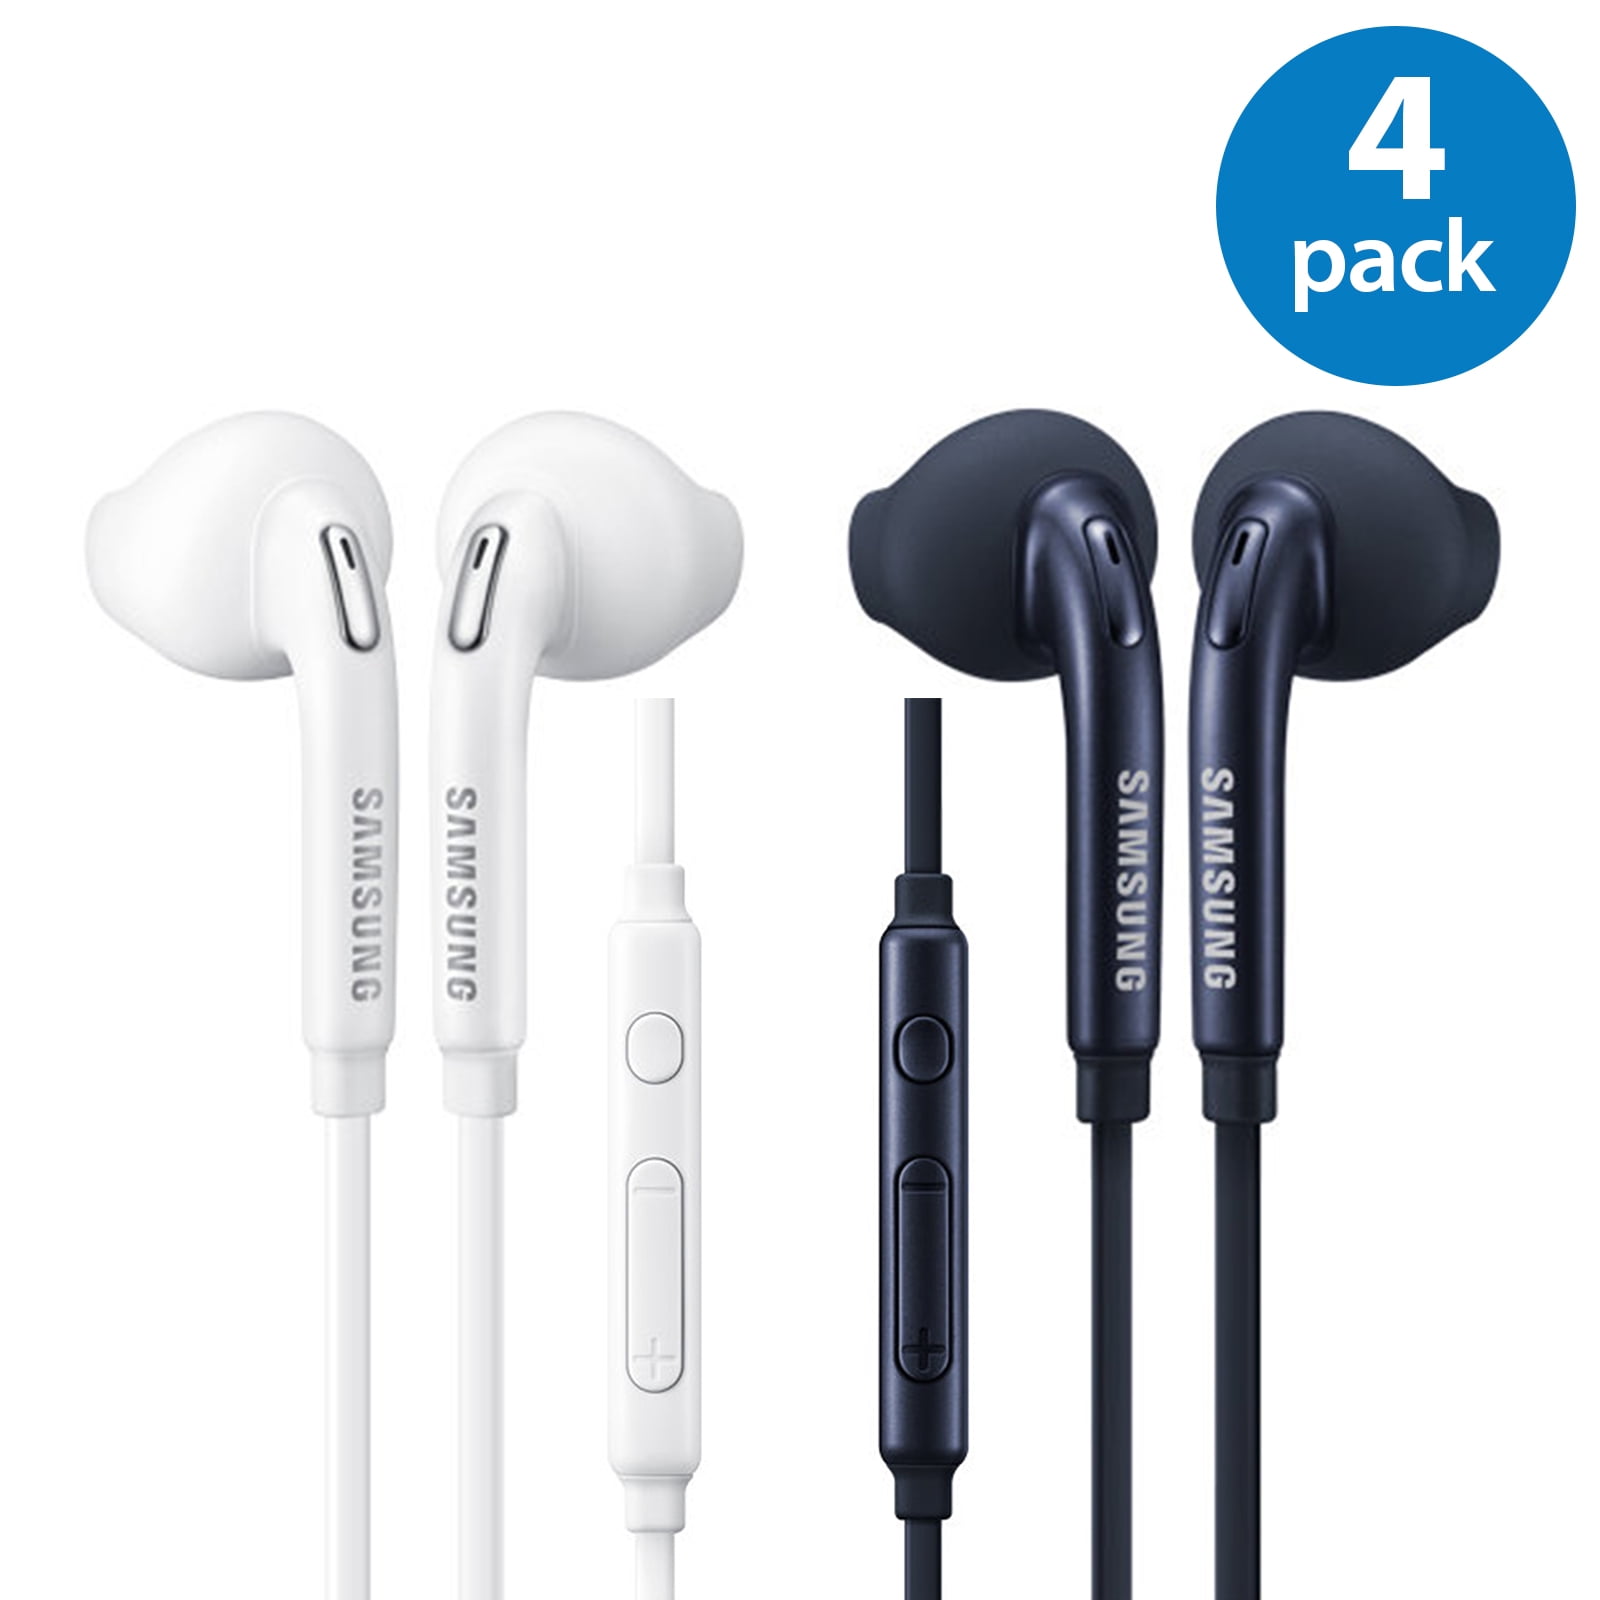 4 Pack of OEM Original Earbud Earphone Headset Headphones With Remote for Samsung Galaxy S6 edge S7 edge S8 S9 S8+ S9+ Plus EO-EG920LW sold by Afflux White